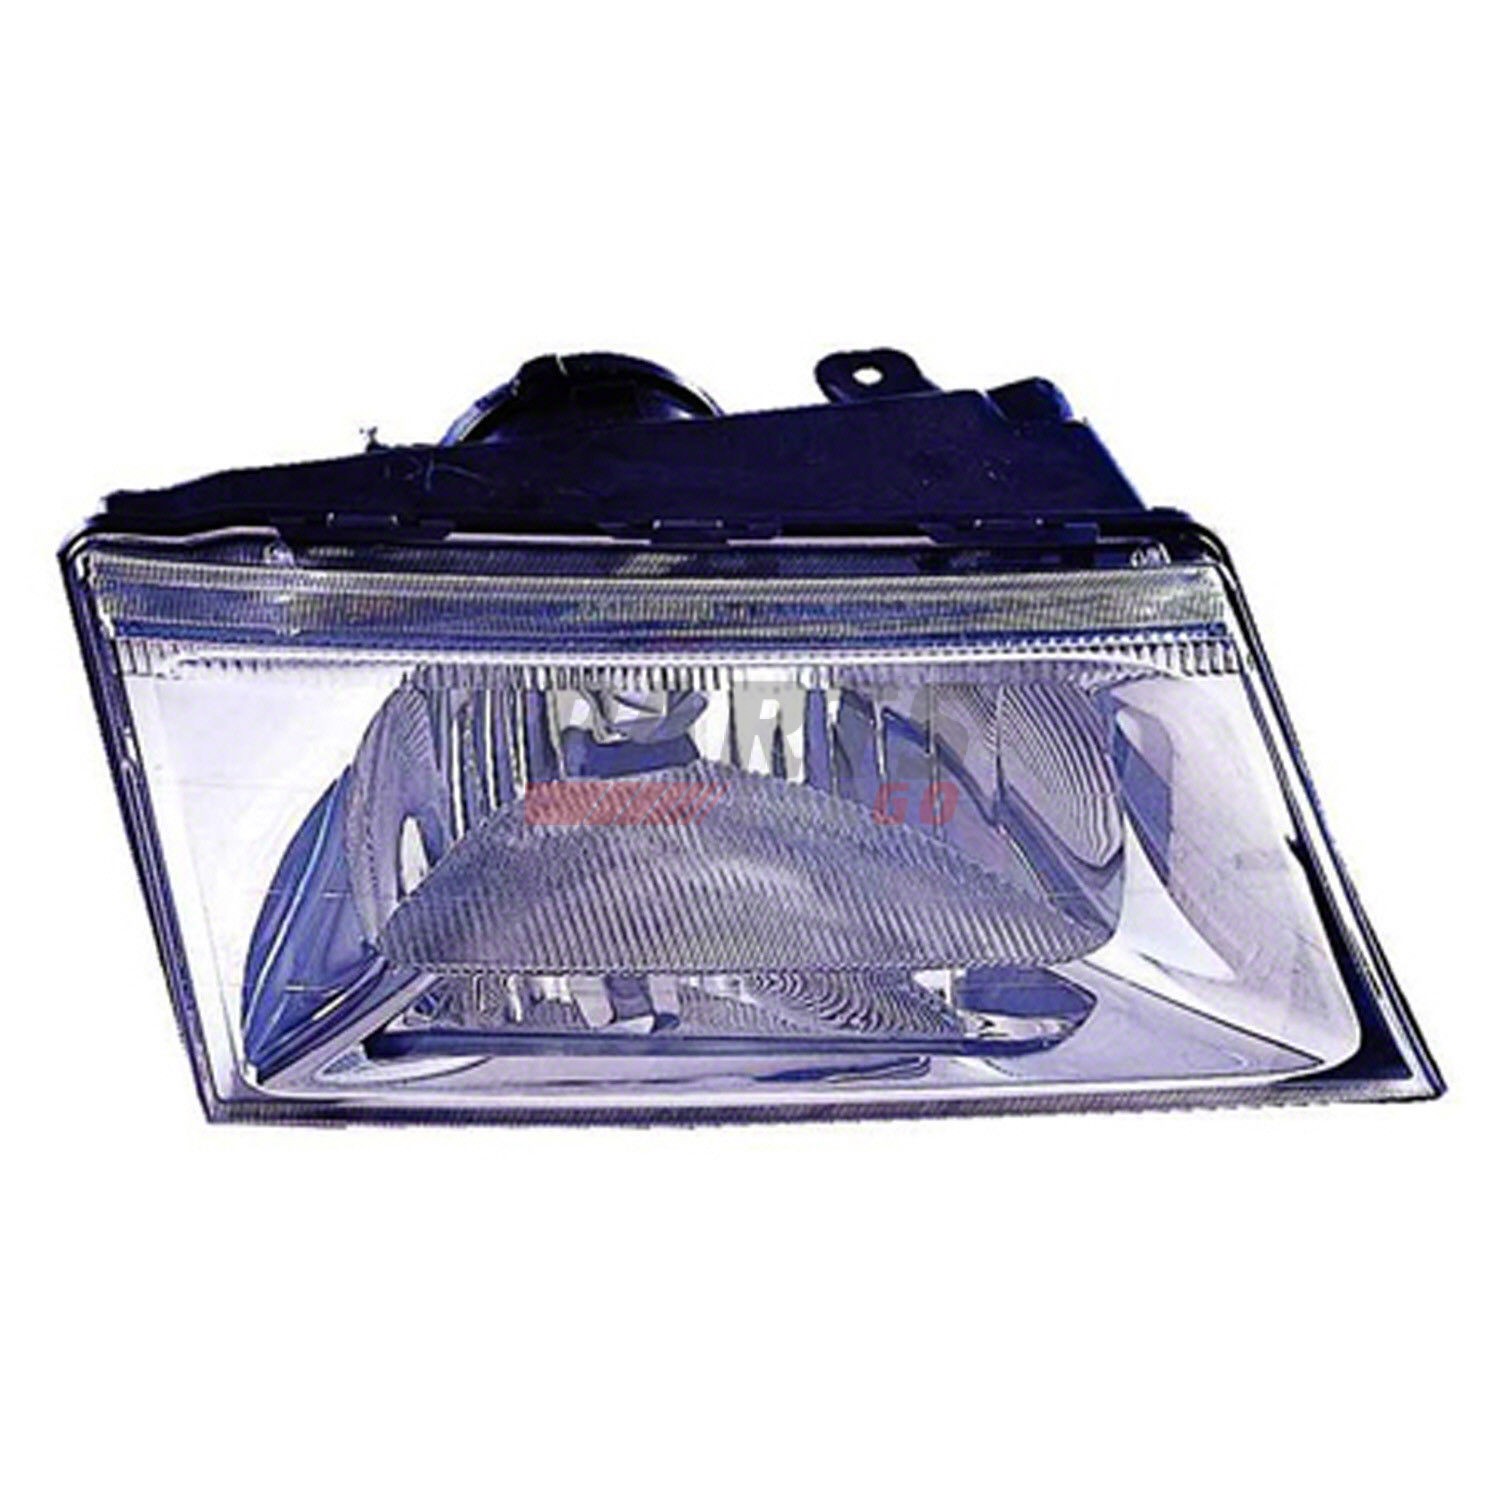 NEW HEAD LIGHT ASSEMBLY RIGHT FITS 2003-2004 MERCURY GRAND MARQUIS 5W3Z13008AA | eBay 2004 Mercury Grand Marquis Headlight Bulb Replacement